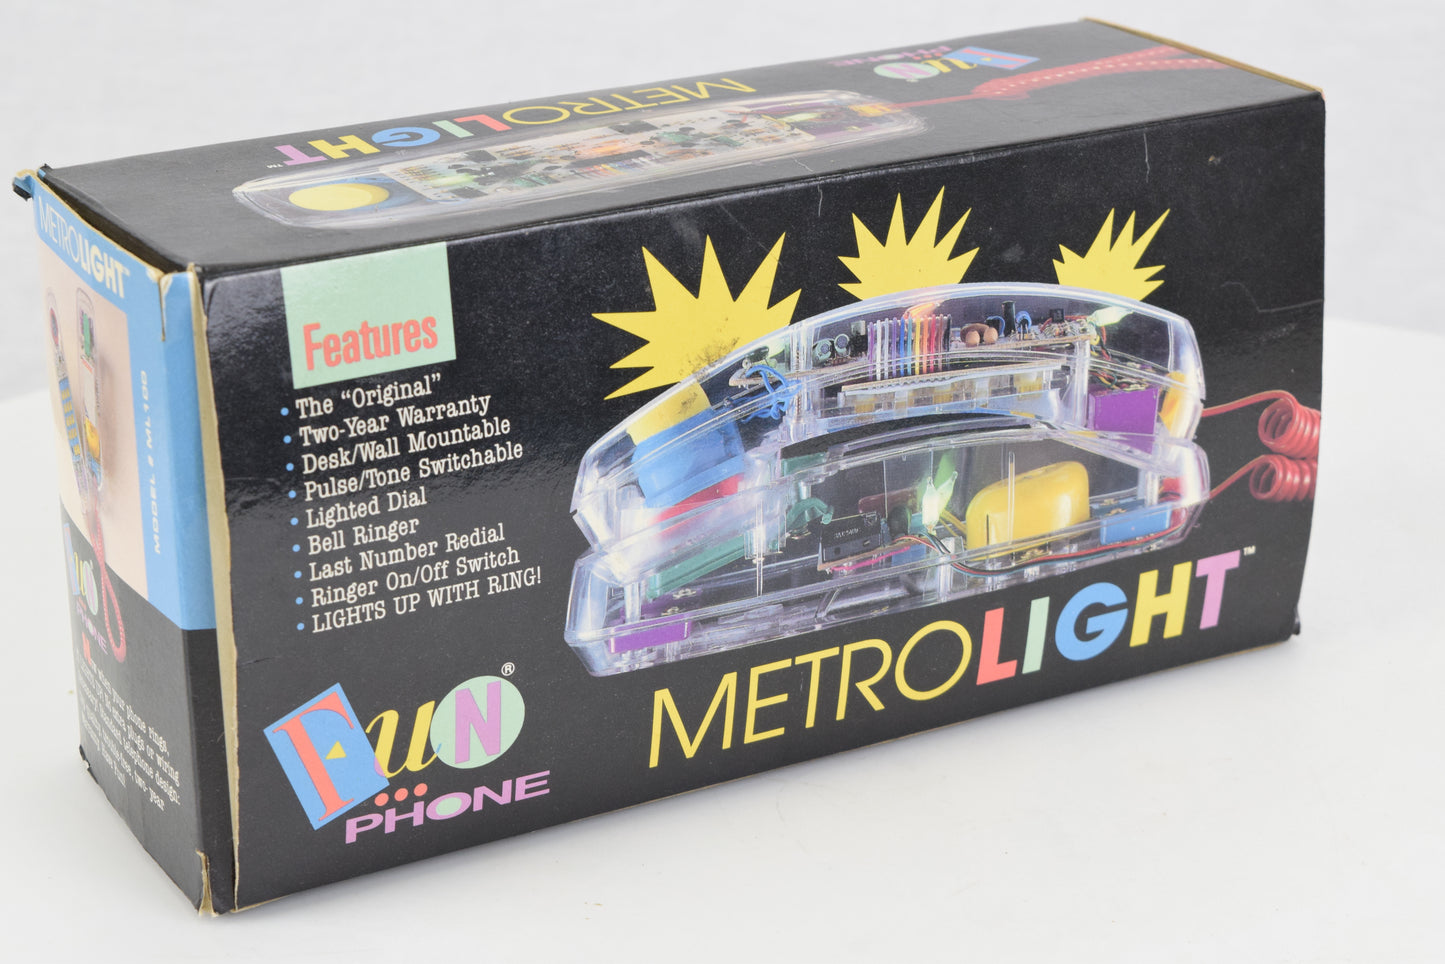 Clear Trimline Style Metrolight Fun Phone - with Yellow Accents